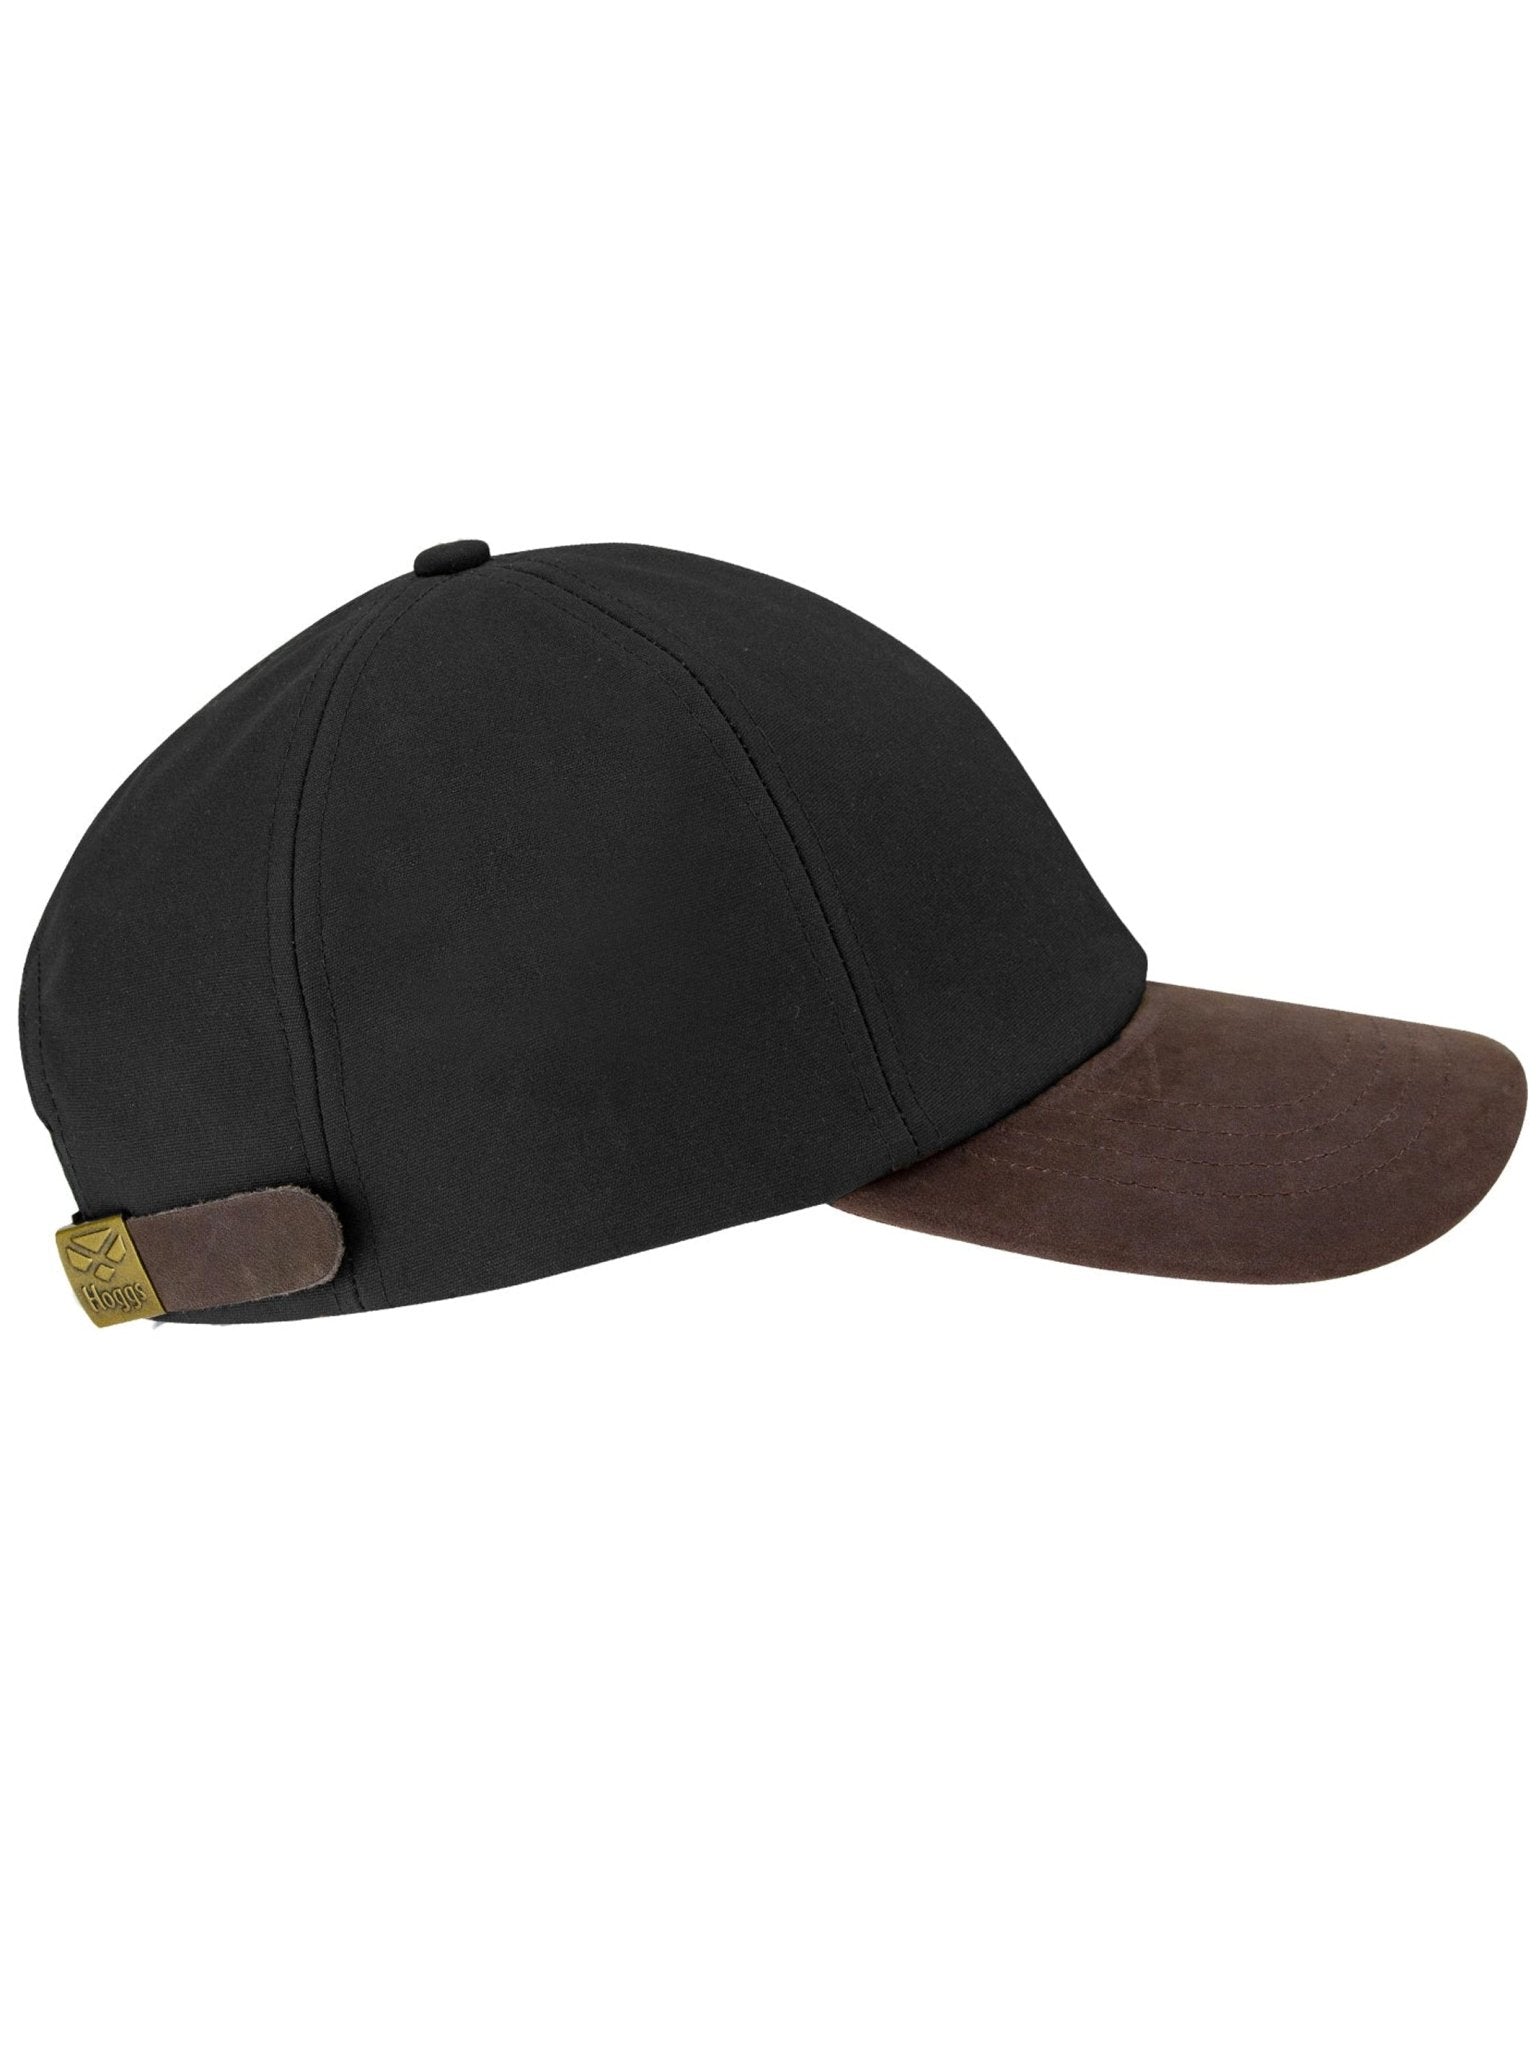 4elementsclothingHoggs of FifeHoggs of Fife - Waxed Water resistant Baseball CapHatsBBCP/NV/1